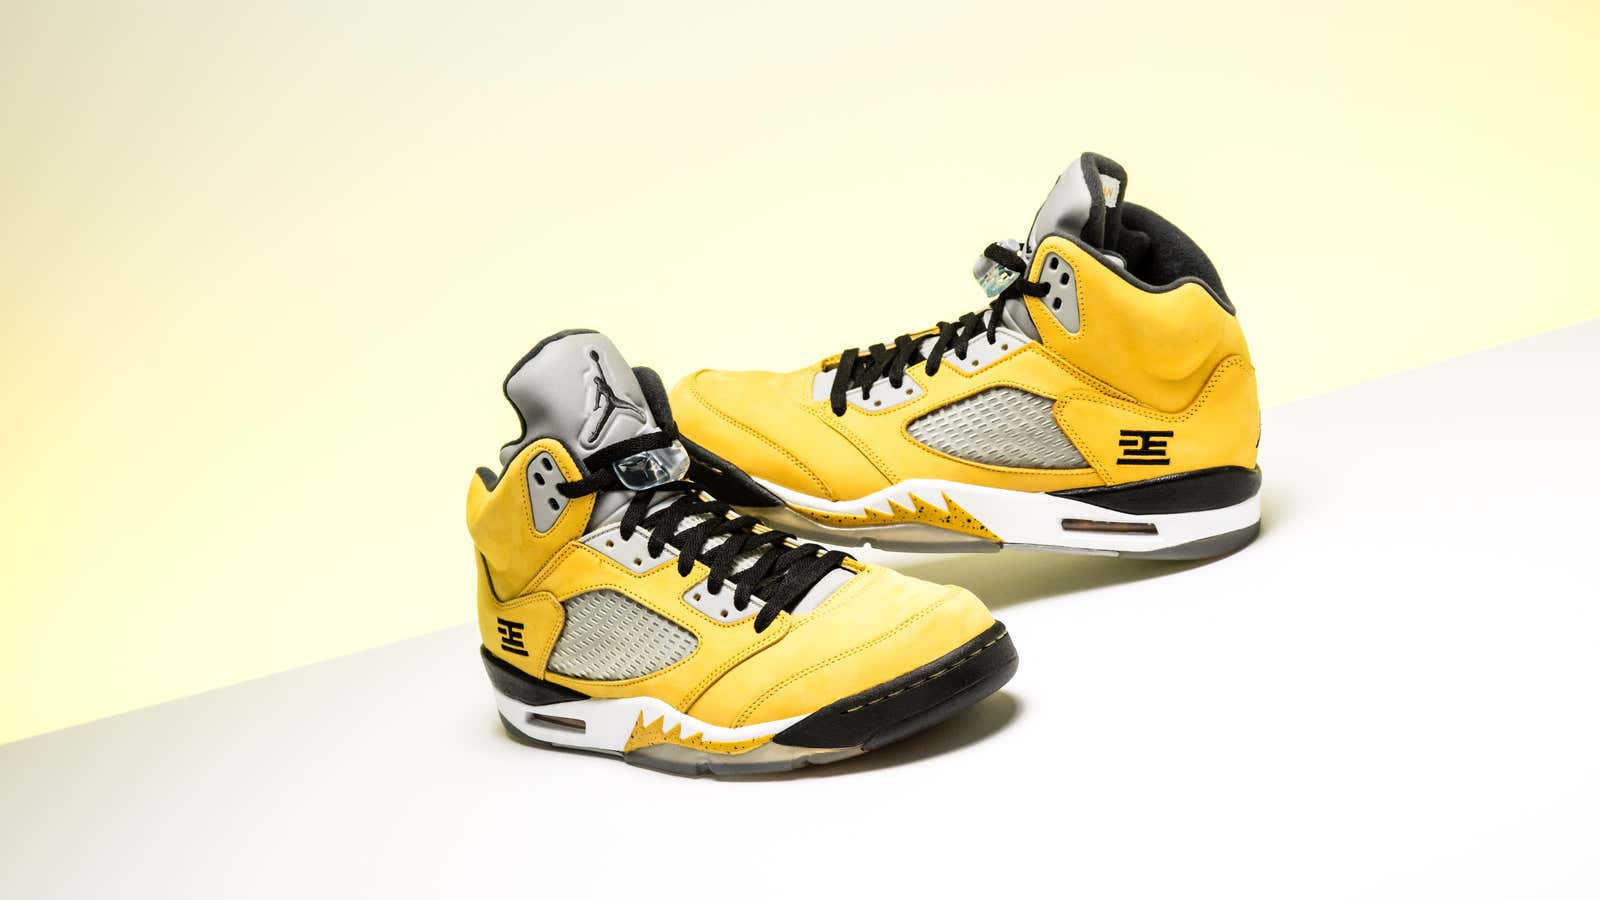 Nike’s Air Jordan 5 “Tokyo 23,” one of the pairs of rare sneakers with a new owner.